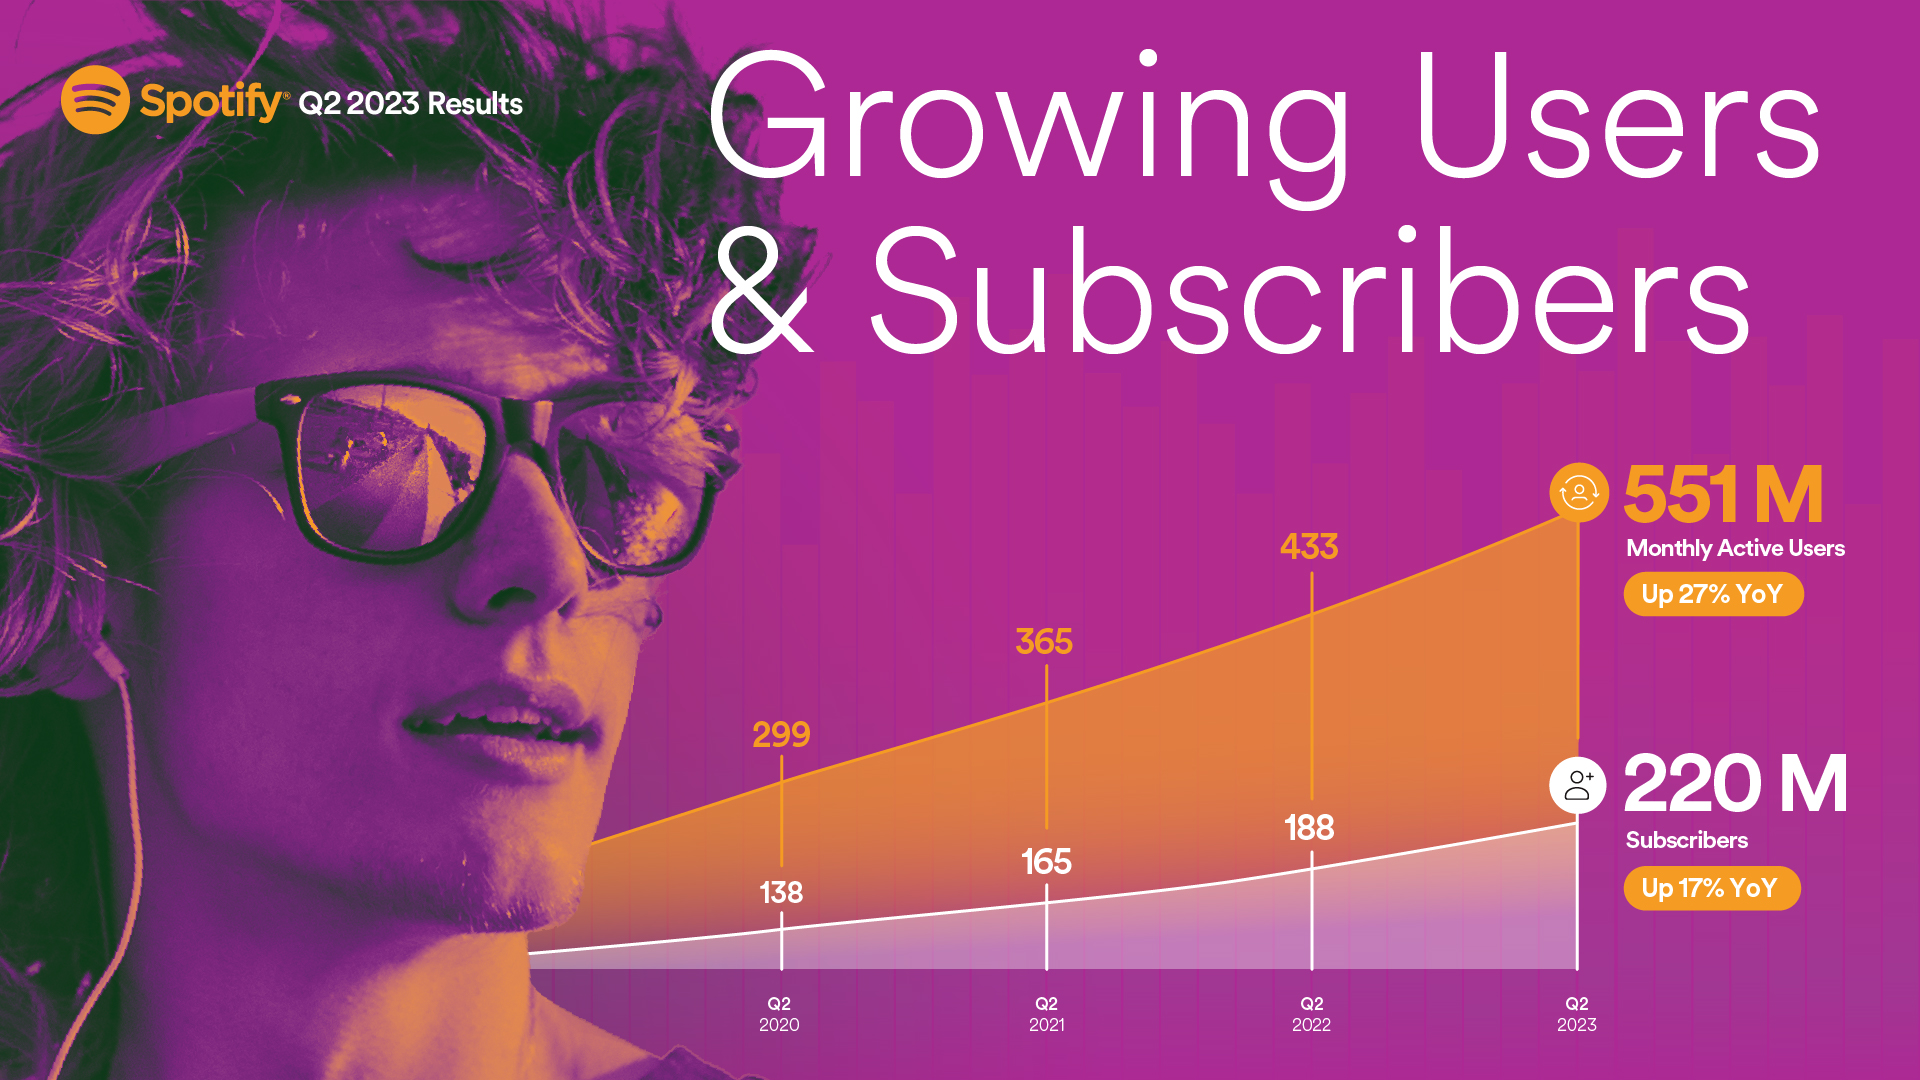 Spotify continues to see growth in users and subscribers – Q2 2023 results